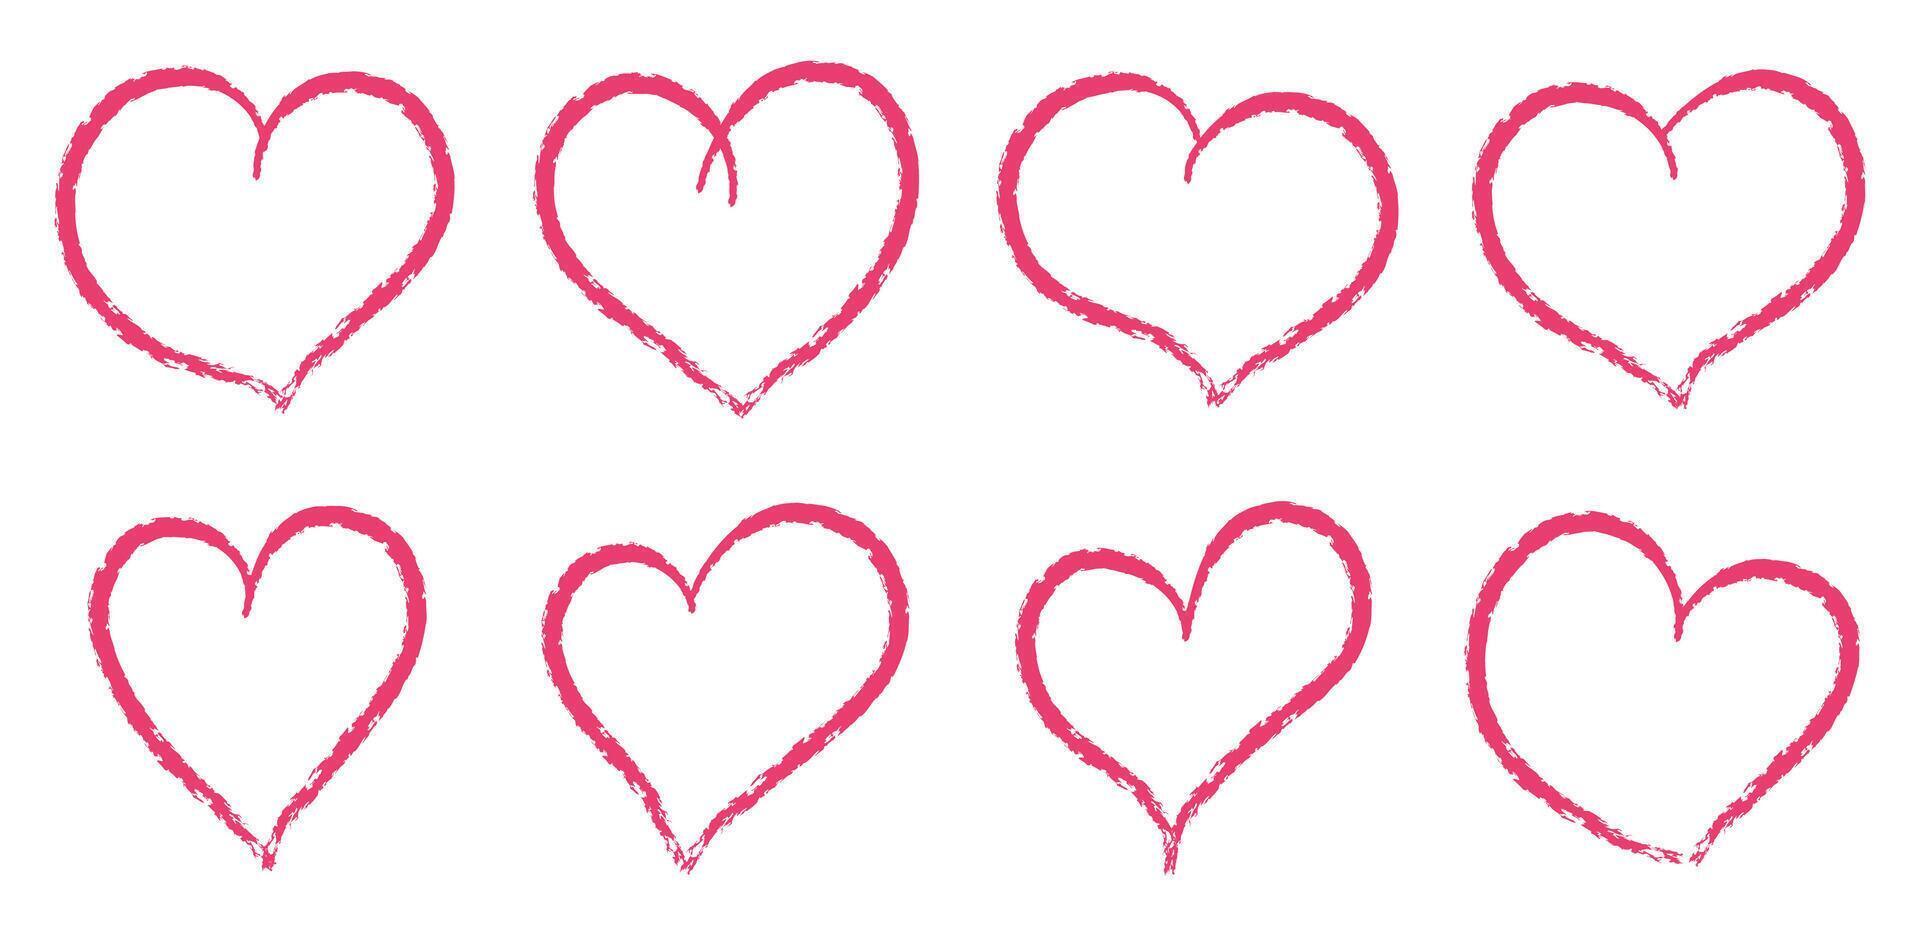 Red and pink crayon hearts painted with lipstick or pencil. Hand drawn chalk symbol of love. Illustration vector